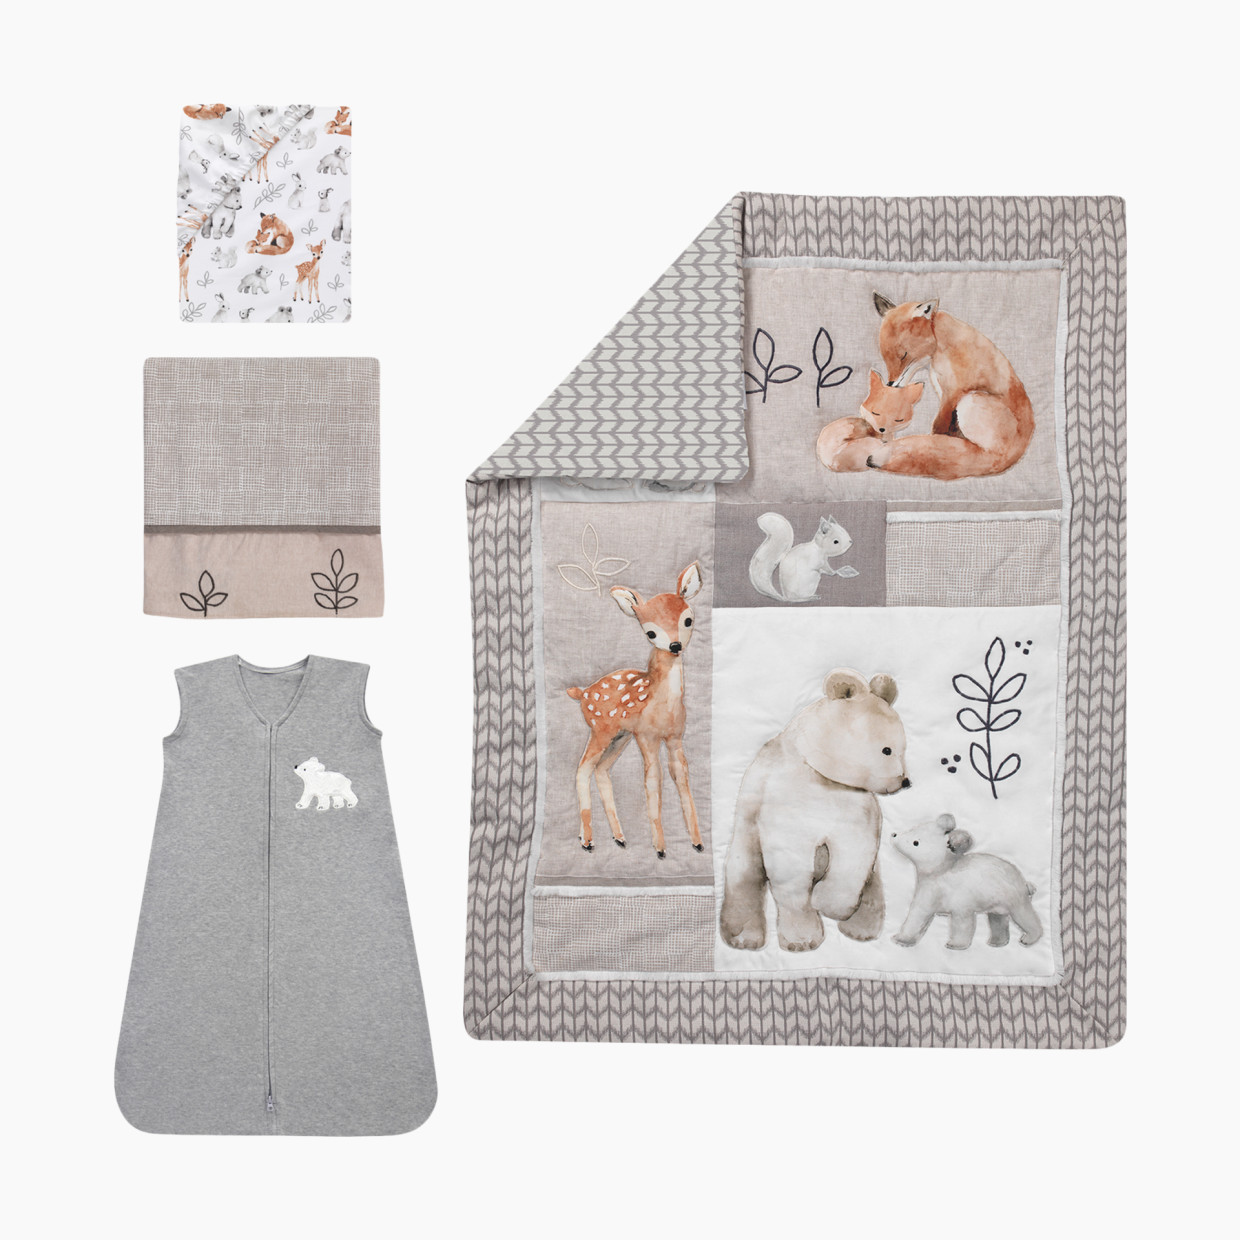 Lambs & Ivy Painted Forest 4-Piece Crib Bedding Set.